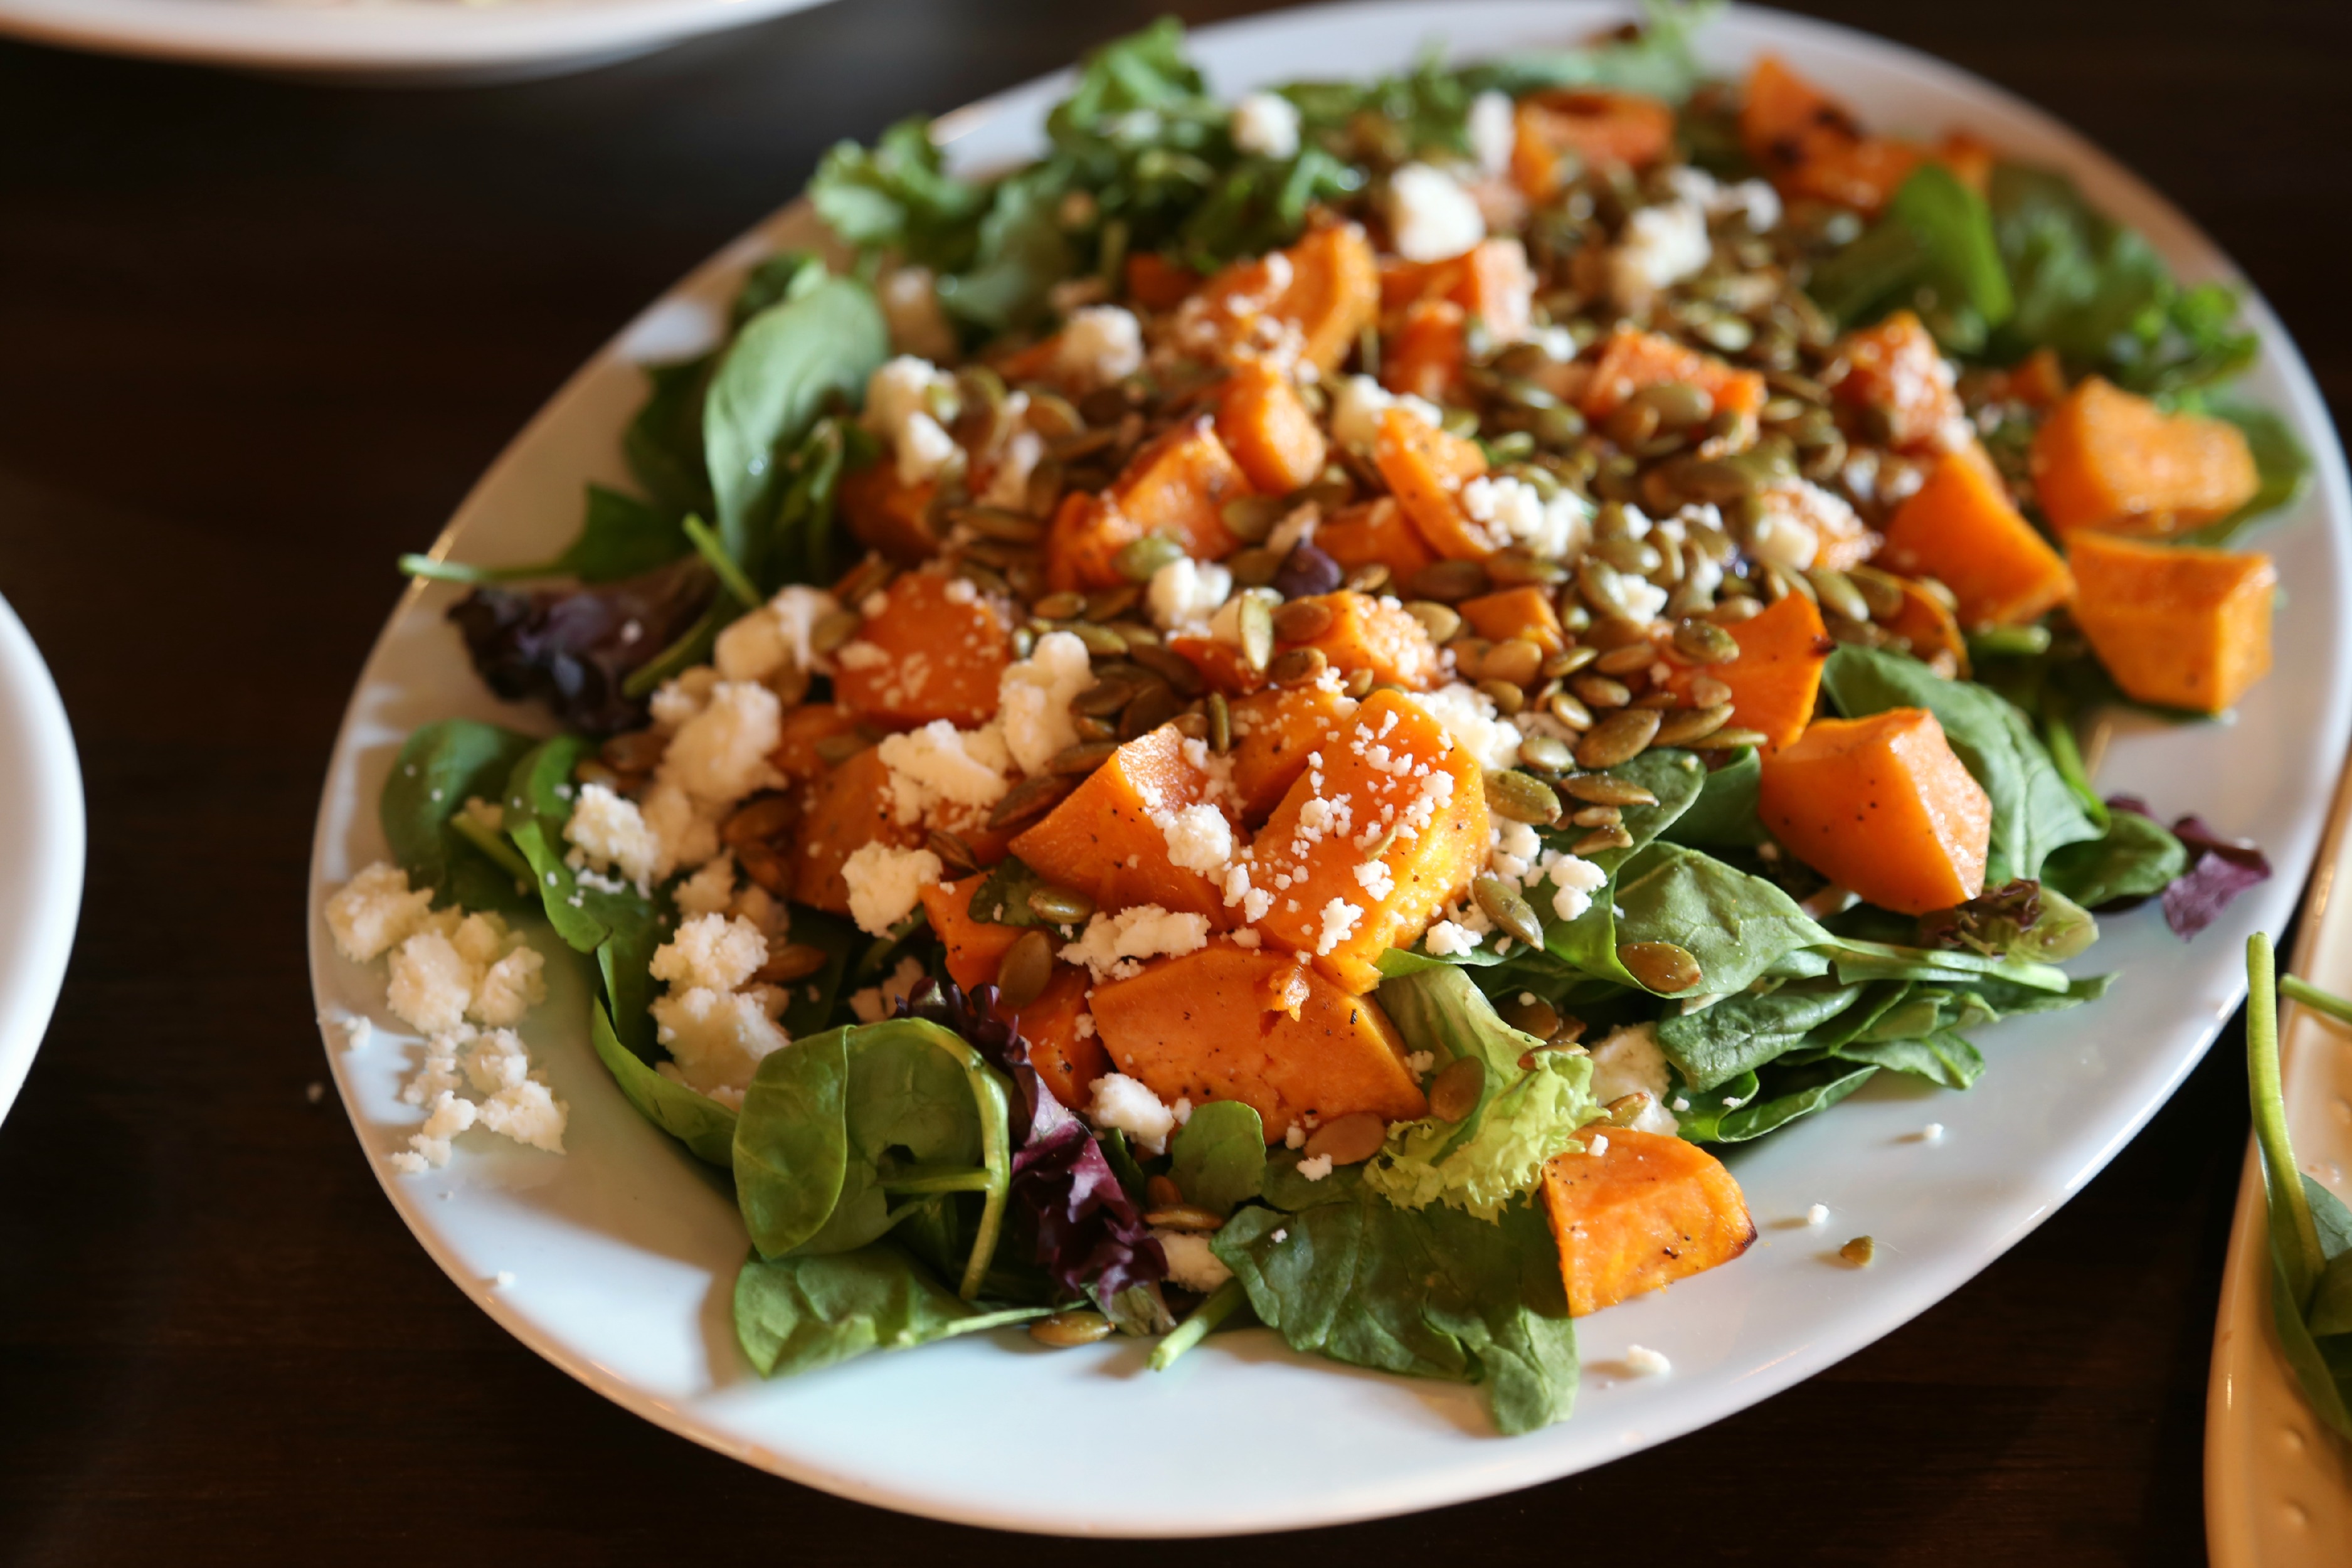 Roasted Sweet-Potato Salad with Hibiscus Lime Dressing - a fall inspired salad made with roasted sweet potatoes served over a bed of mixed greens, topped with queso fresco, pepitas and dressed with hibiscus-lime vinaigrette. 